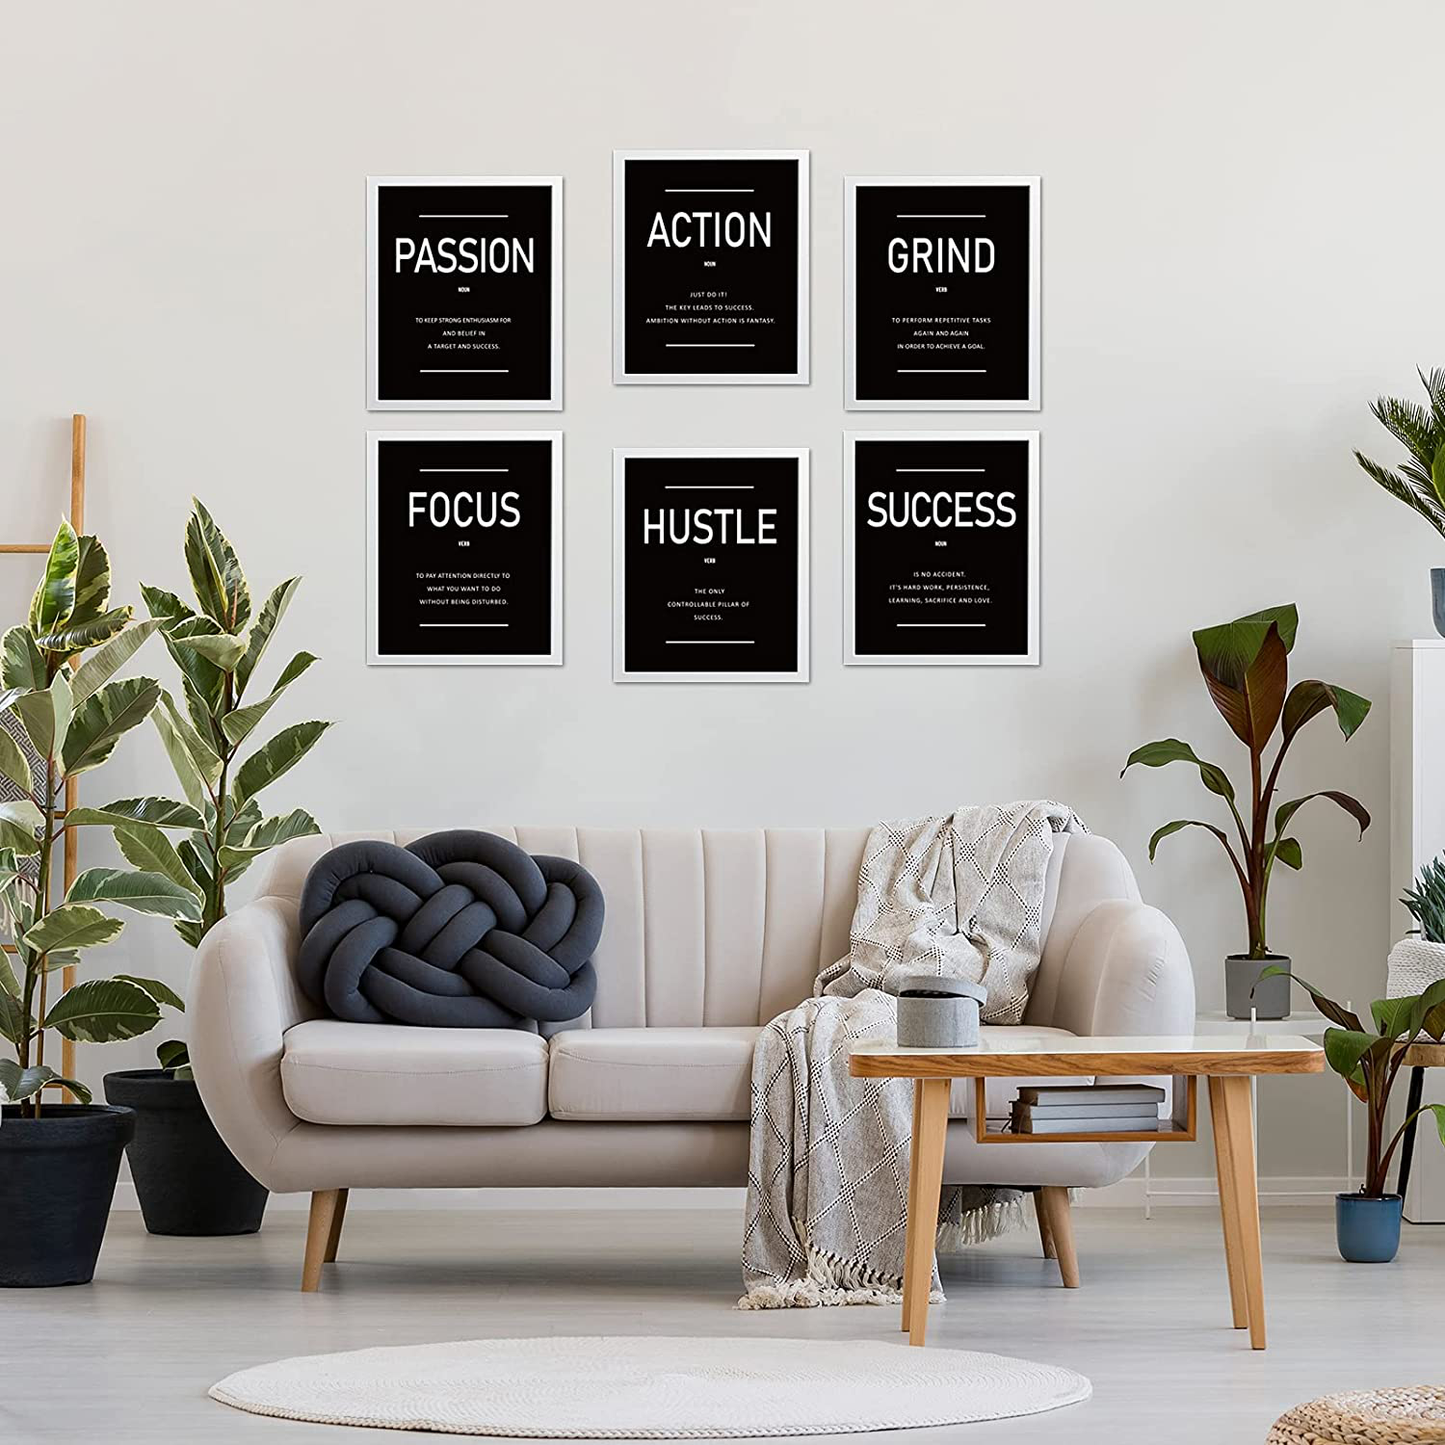 Inspirational Wall Decor for Living Room Office - Motivational Wall Art for Bedroom - Positive Quotes & Sayings Posters - Daily Affirmation for Men Women Teen kids - Black and White Wall Art (Set of 6, 12X16IN, Unframed)